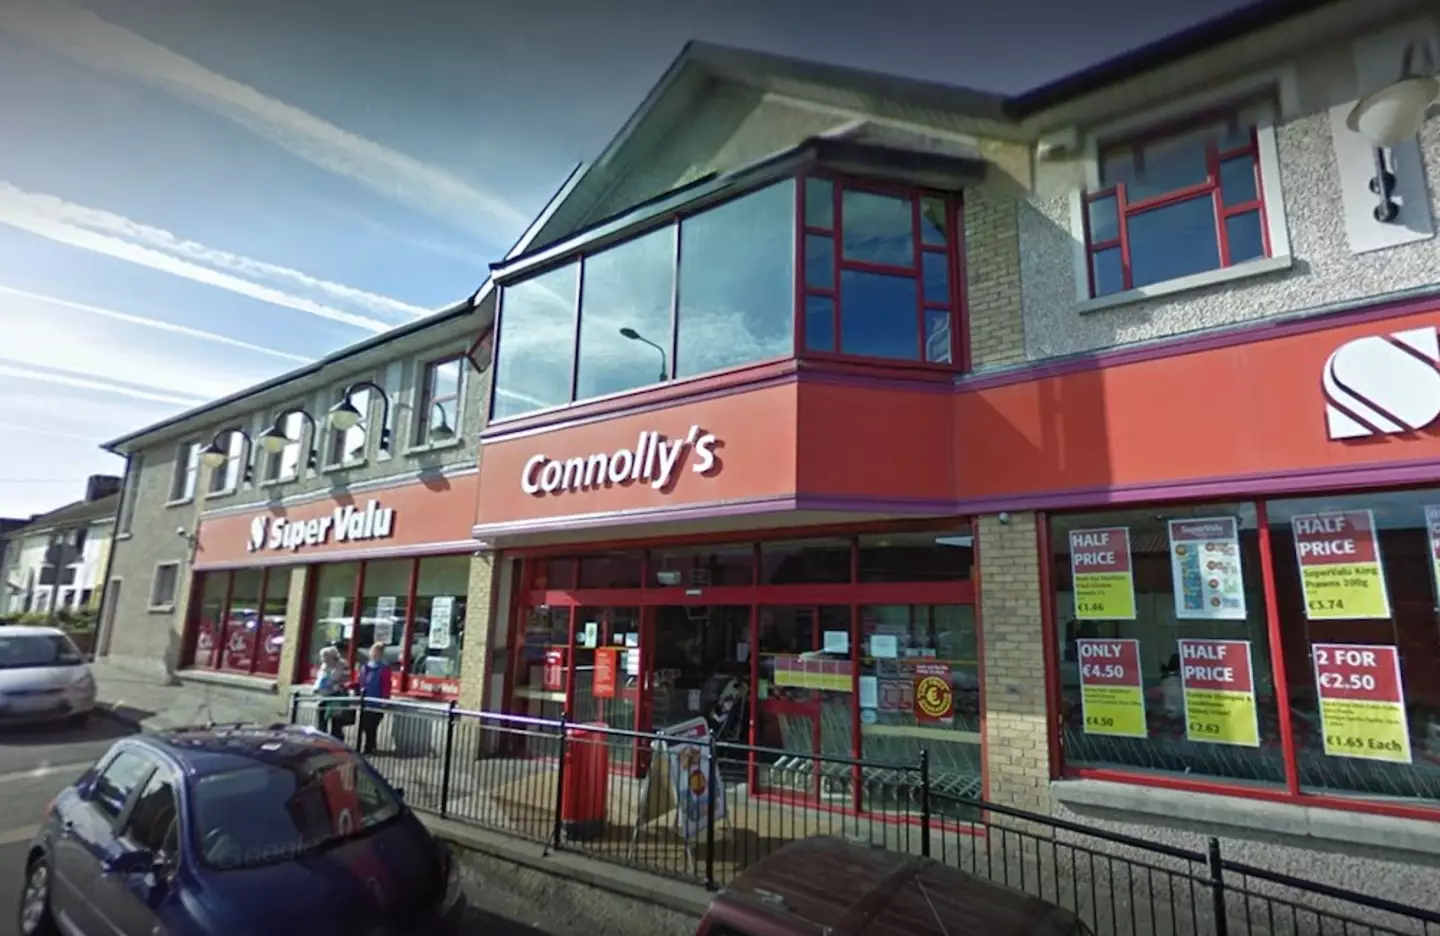 Connolly's SuperValu is a grocery store located in Ireland.